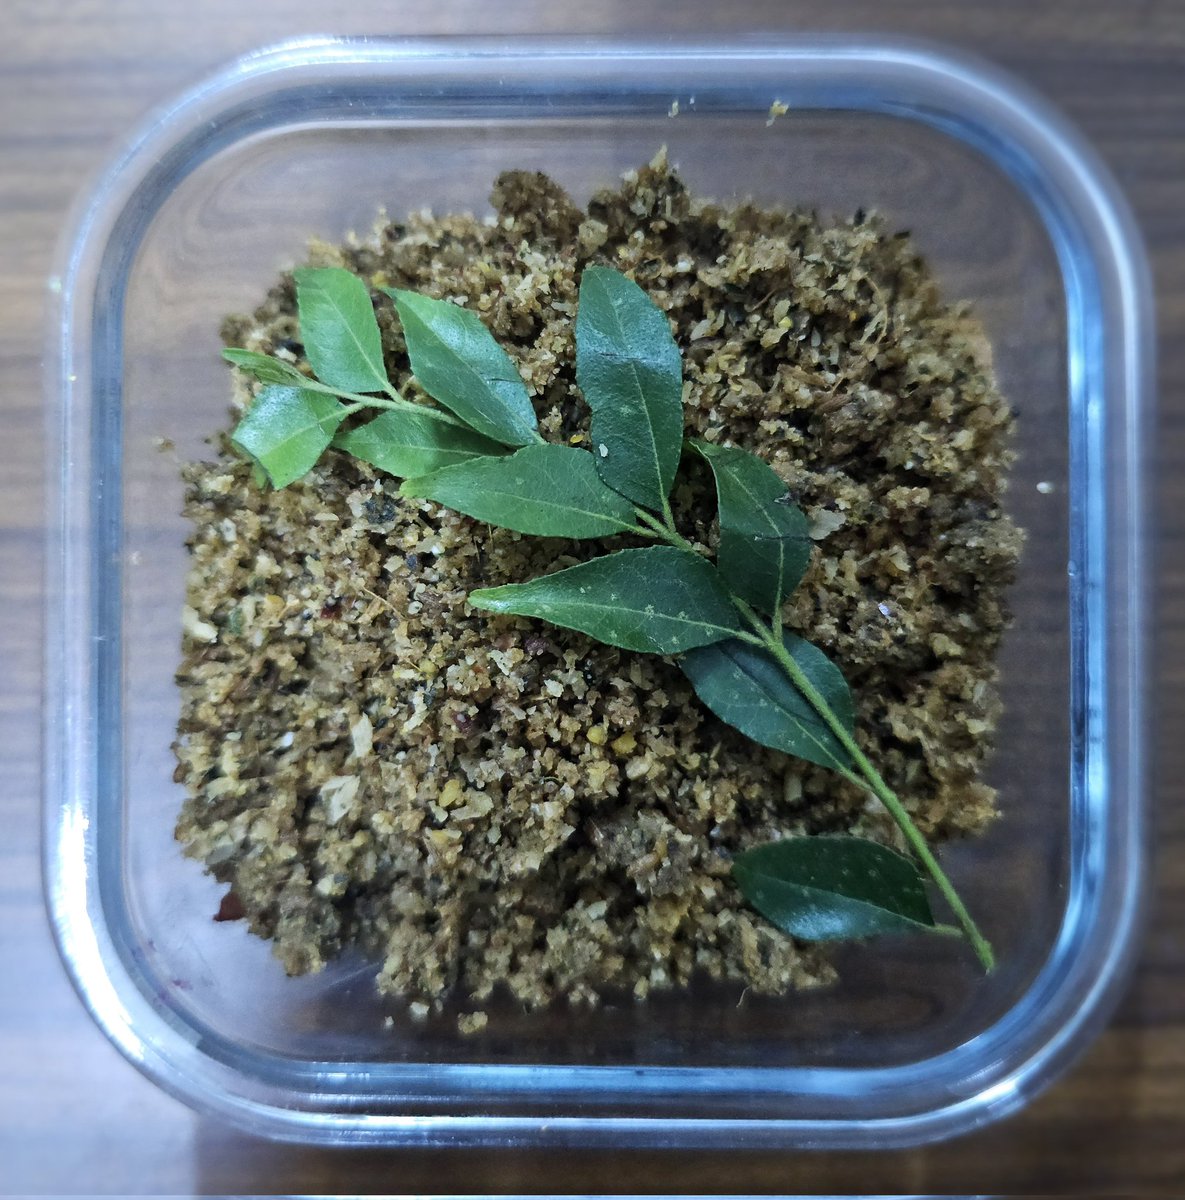 Prepared Curry Leaves Podi and trust me the taste was as authentic as i had some last 8-9 years ago in Bangalore. Superrrrr taste. Thanks @upliance #30DaysWithUpliance